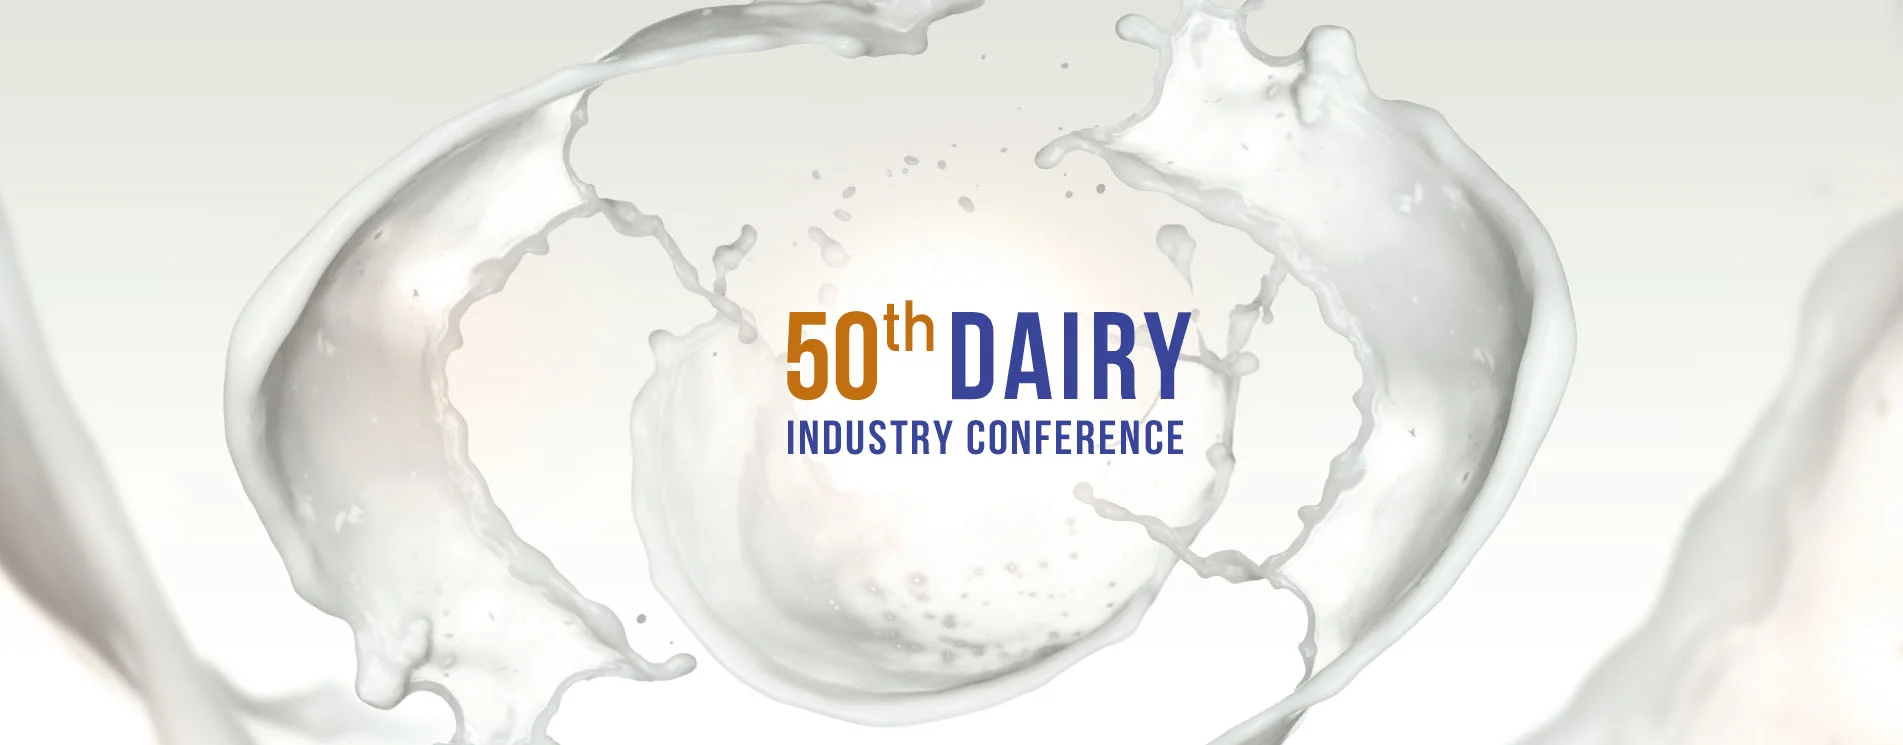 DAIRY INDUSTRY CONFERENCE